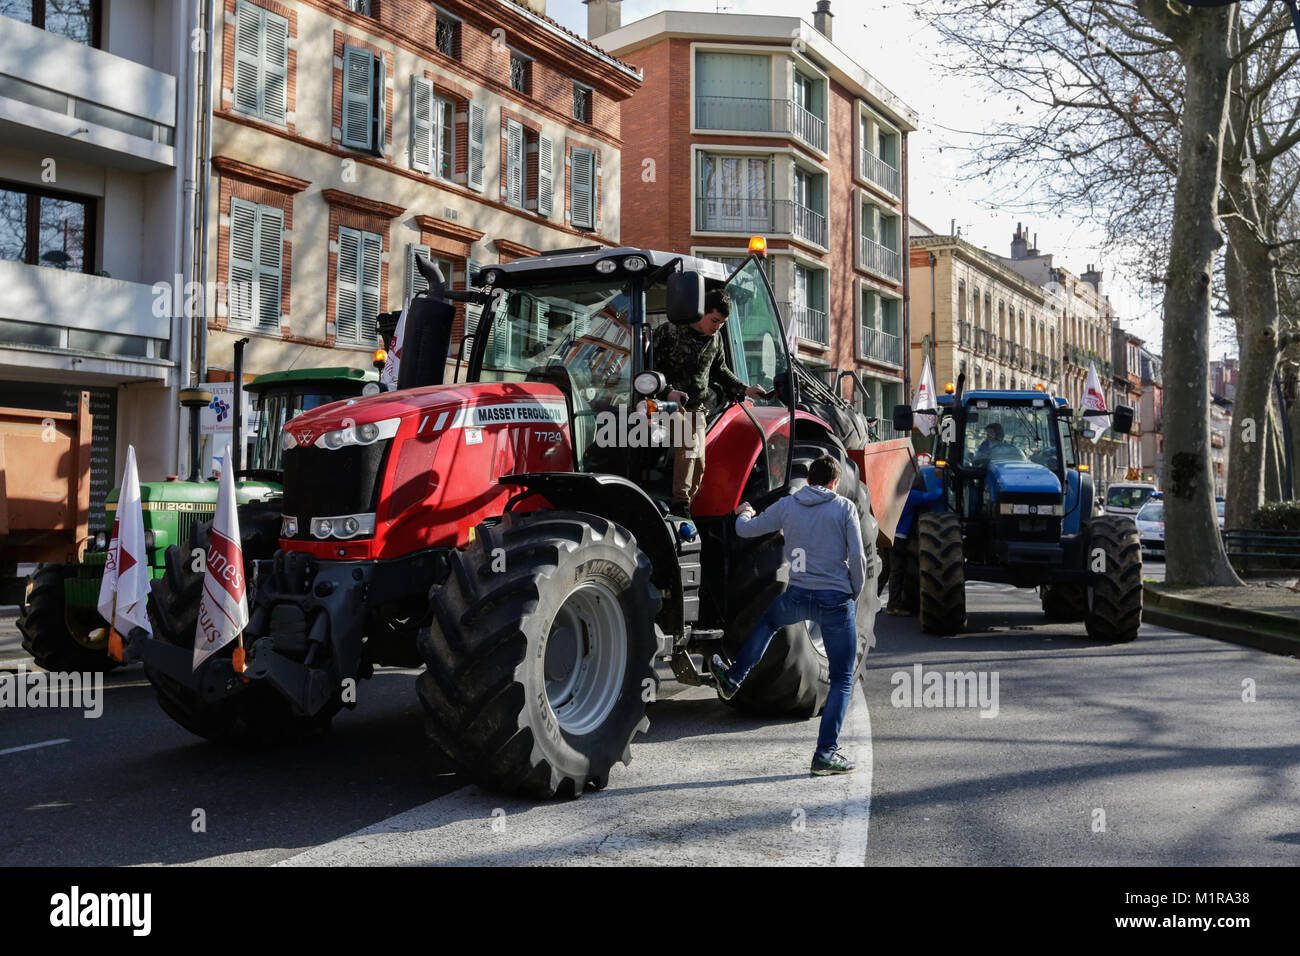 Toulouse, France. 31st Jan, 2018. Farmers and tractors are seen on a street during a demonstration in Toulouse, France, Jan. 31, 2018. Farmers set up a filter dam on Wednesday to slow down traffic to protest against the decrease of the subsidies allocated in the region. Credit: Jose Santos/Xinhua/Alamy Live News Stock Photo